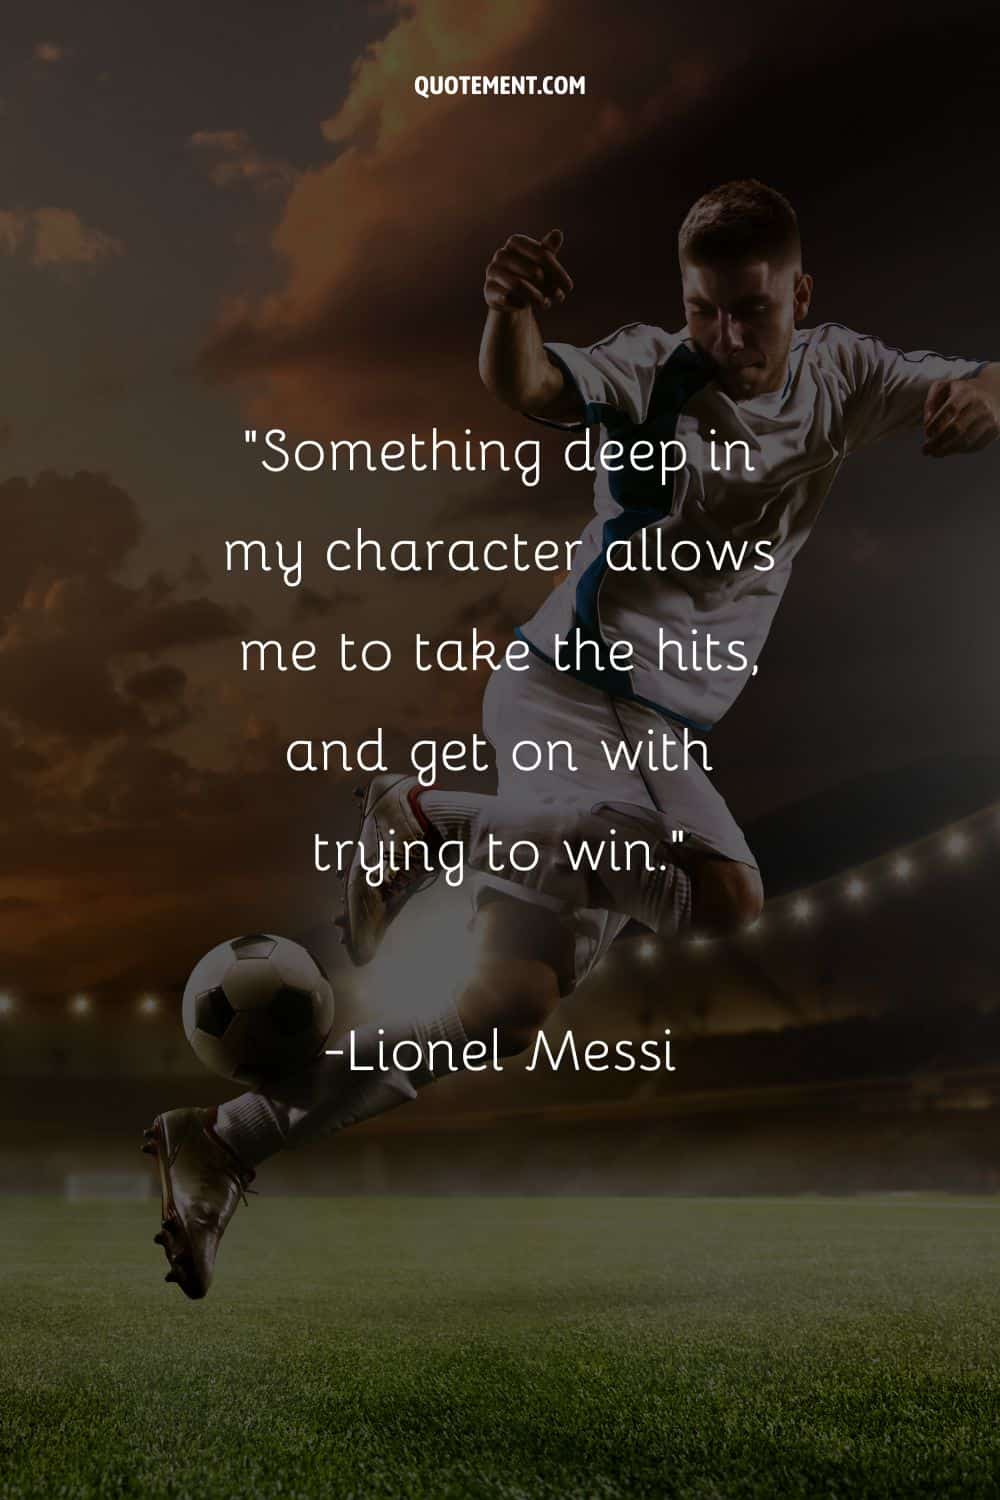 Player shines as lights focus on the ball representing famous quote by soccer player